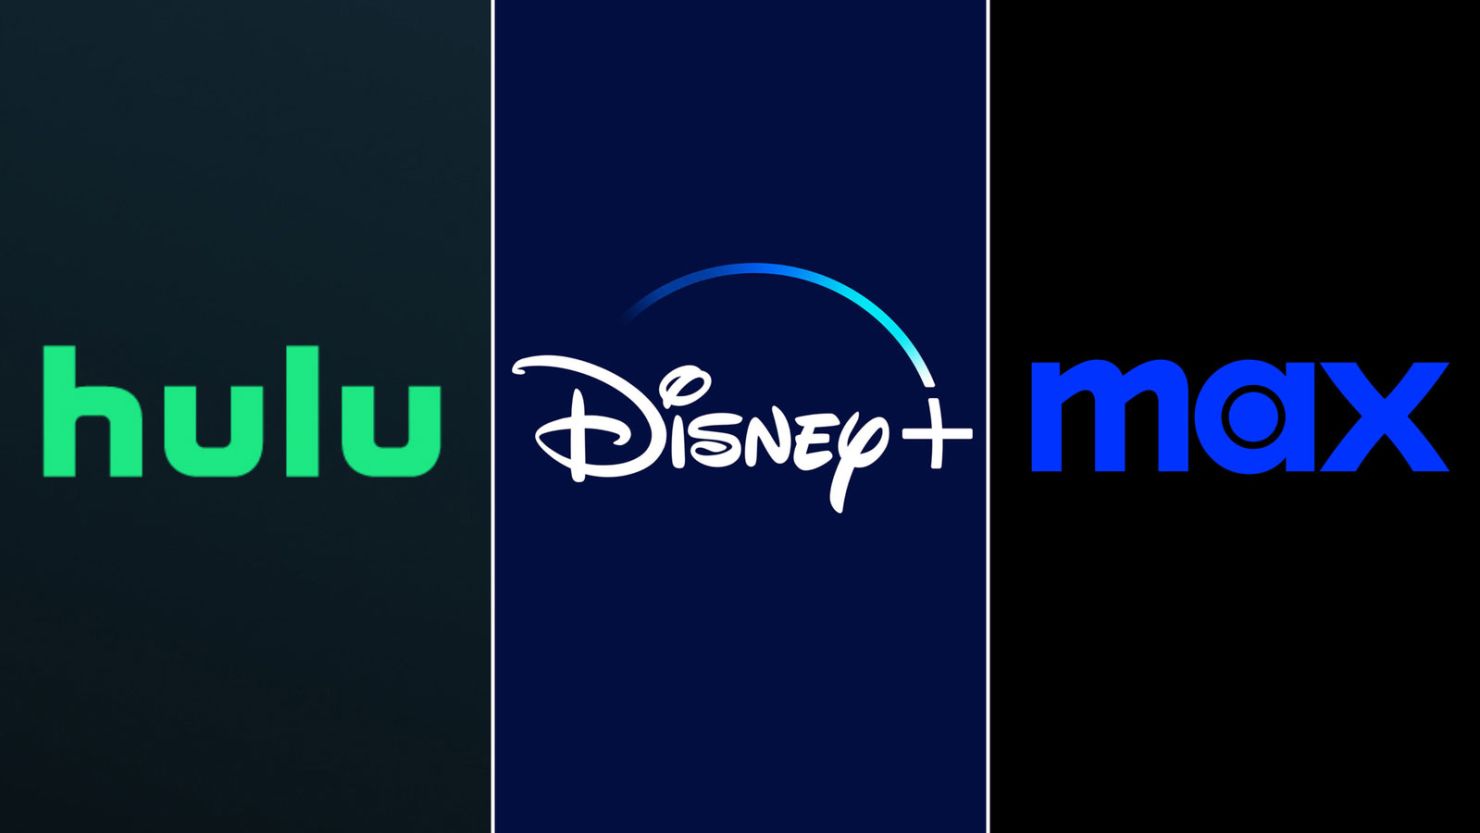 Hulu, Disney+ and Max are among the streaming services being offered in a new bundle announced Wednesday.